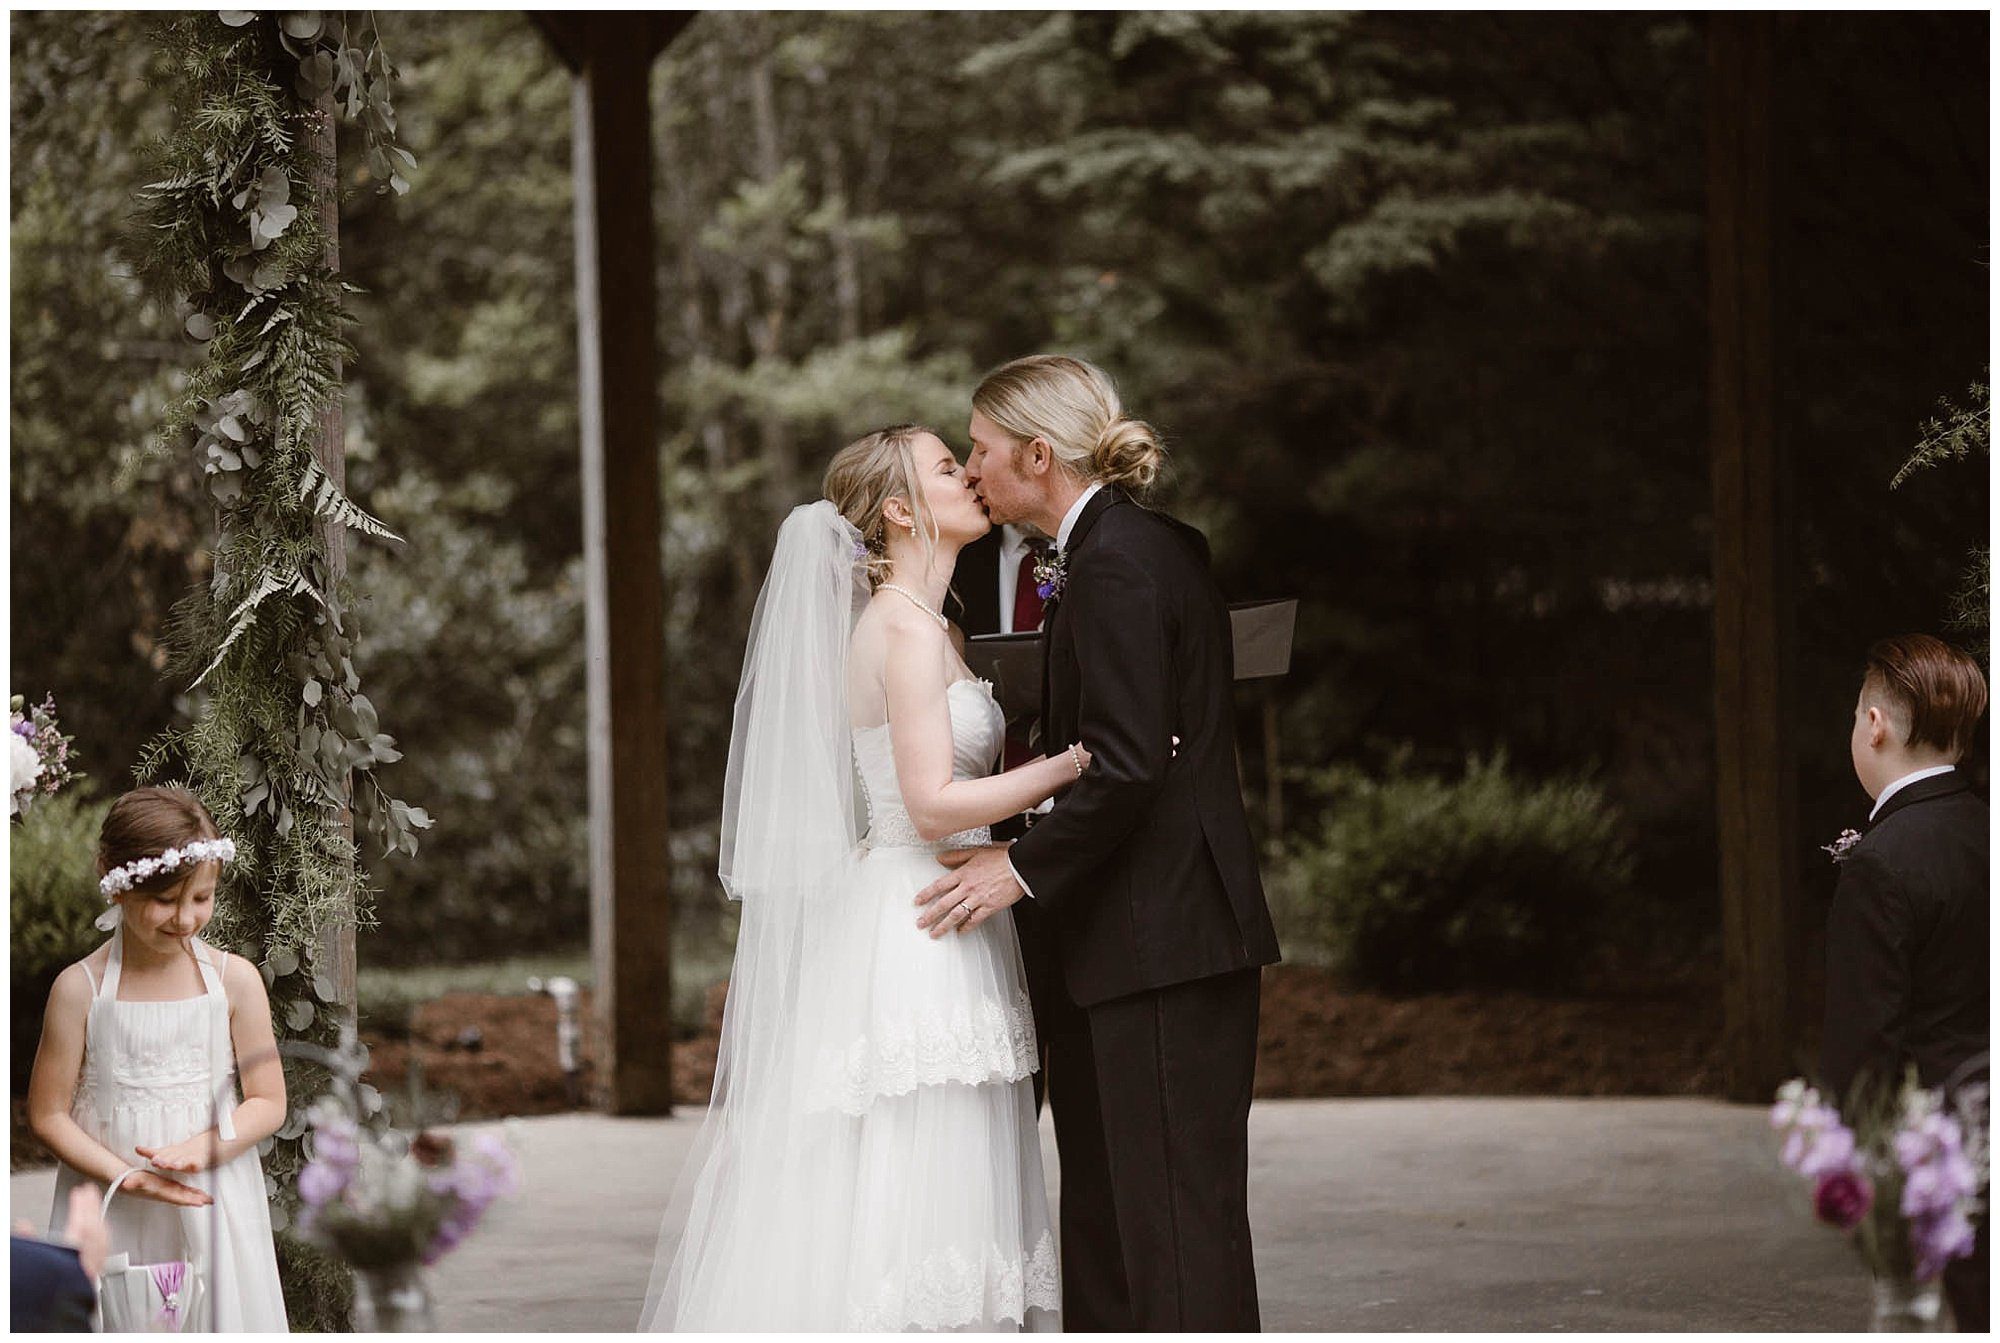 First kiss at wedding in Townsend Mountain Wedding Venue